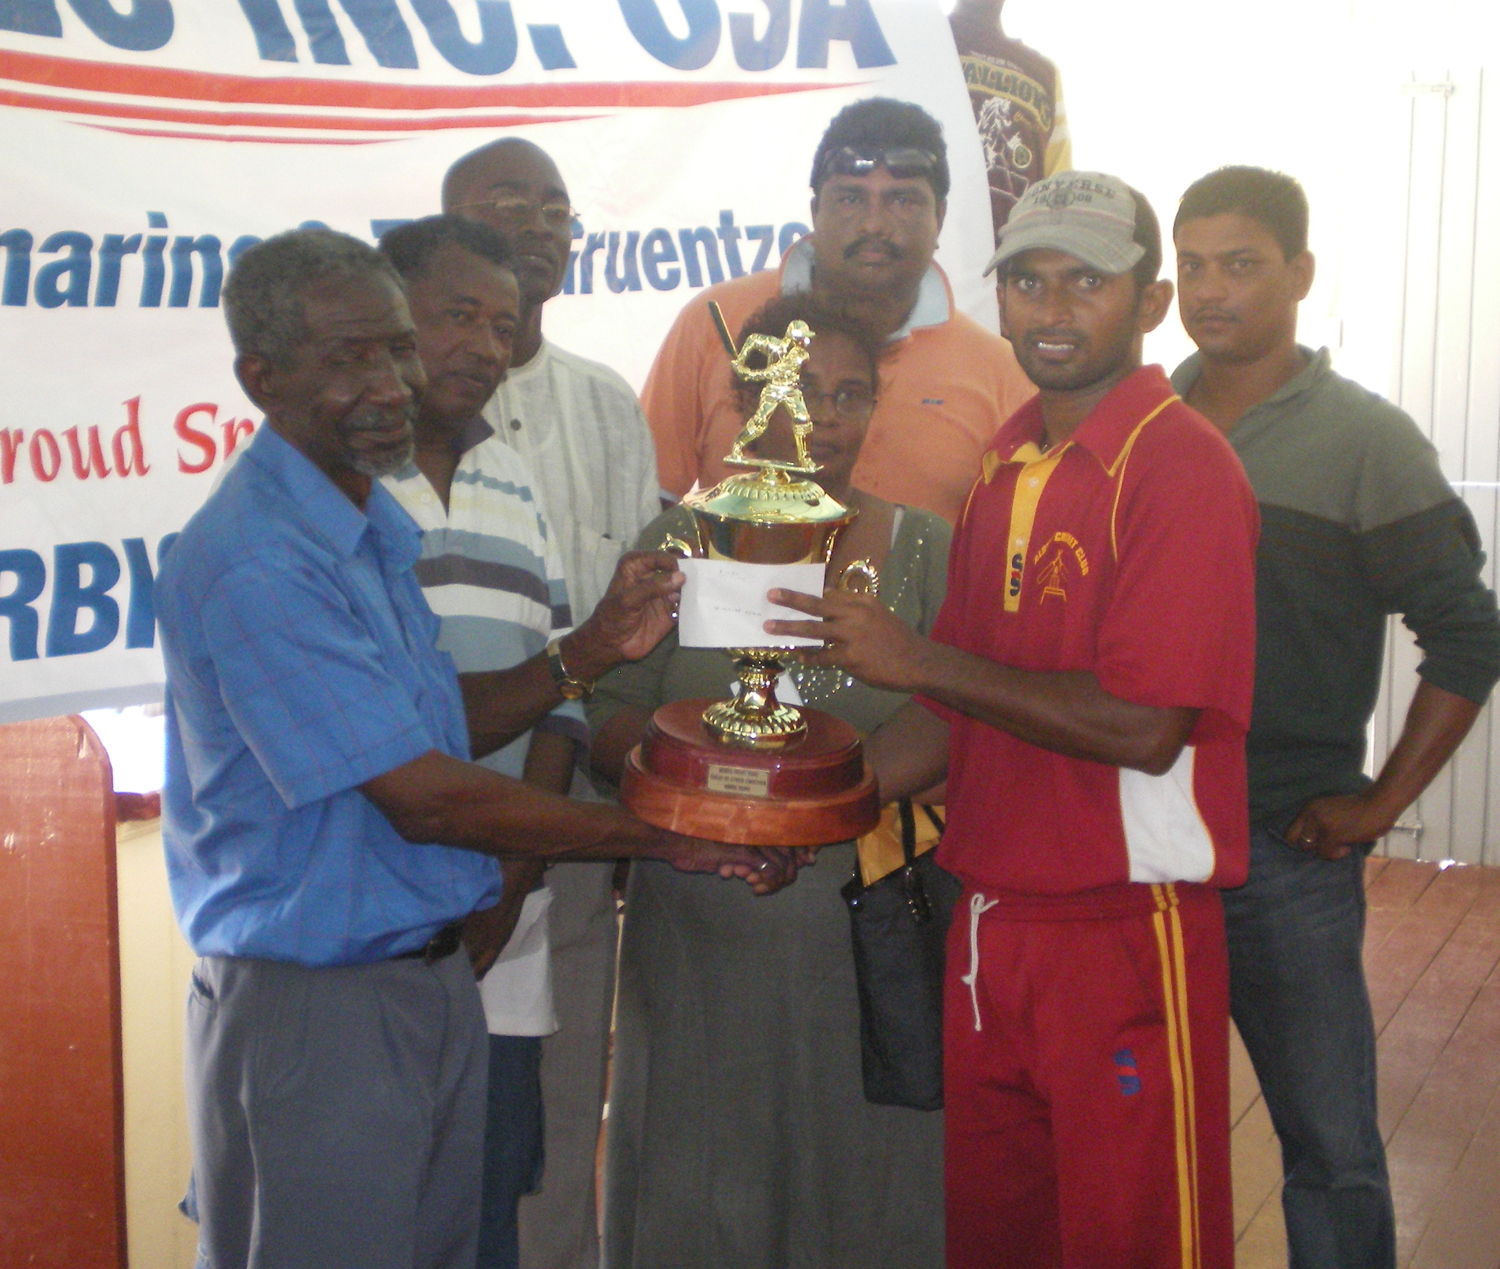 Albion Community Centre captain Sewnarine Chattergoon receives the TENELEC INC championship trophy from former president of the Berbice Cricket Board of Control (BCBC) Malcolm Peters while other BCBC officials look on.